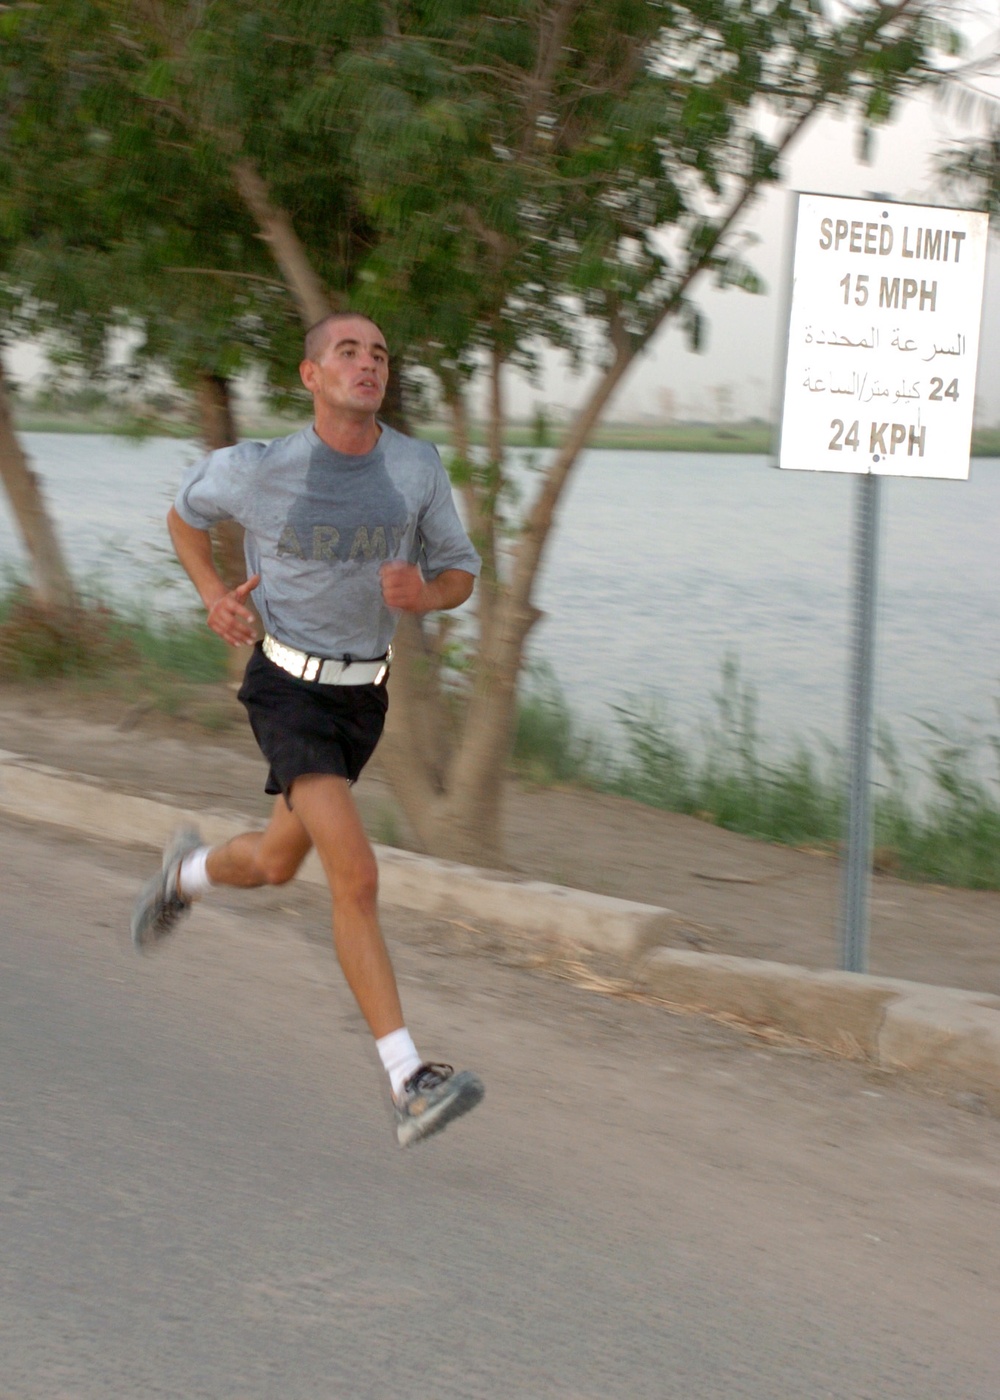 Early-Rising Soldiers Compete in 5K Run in Iraq